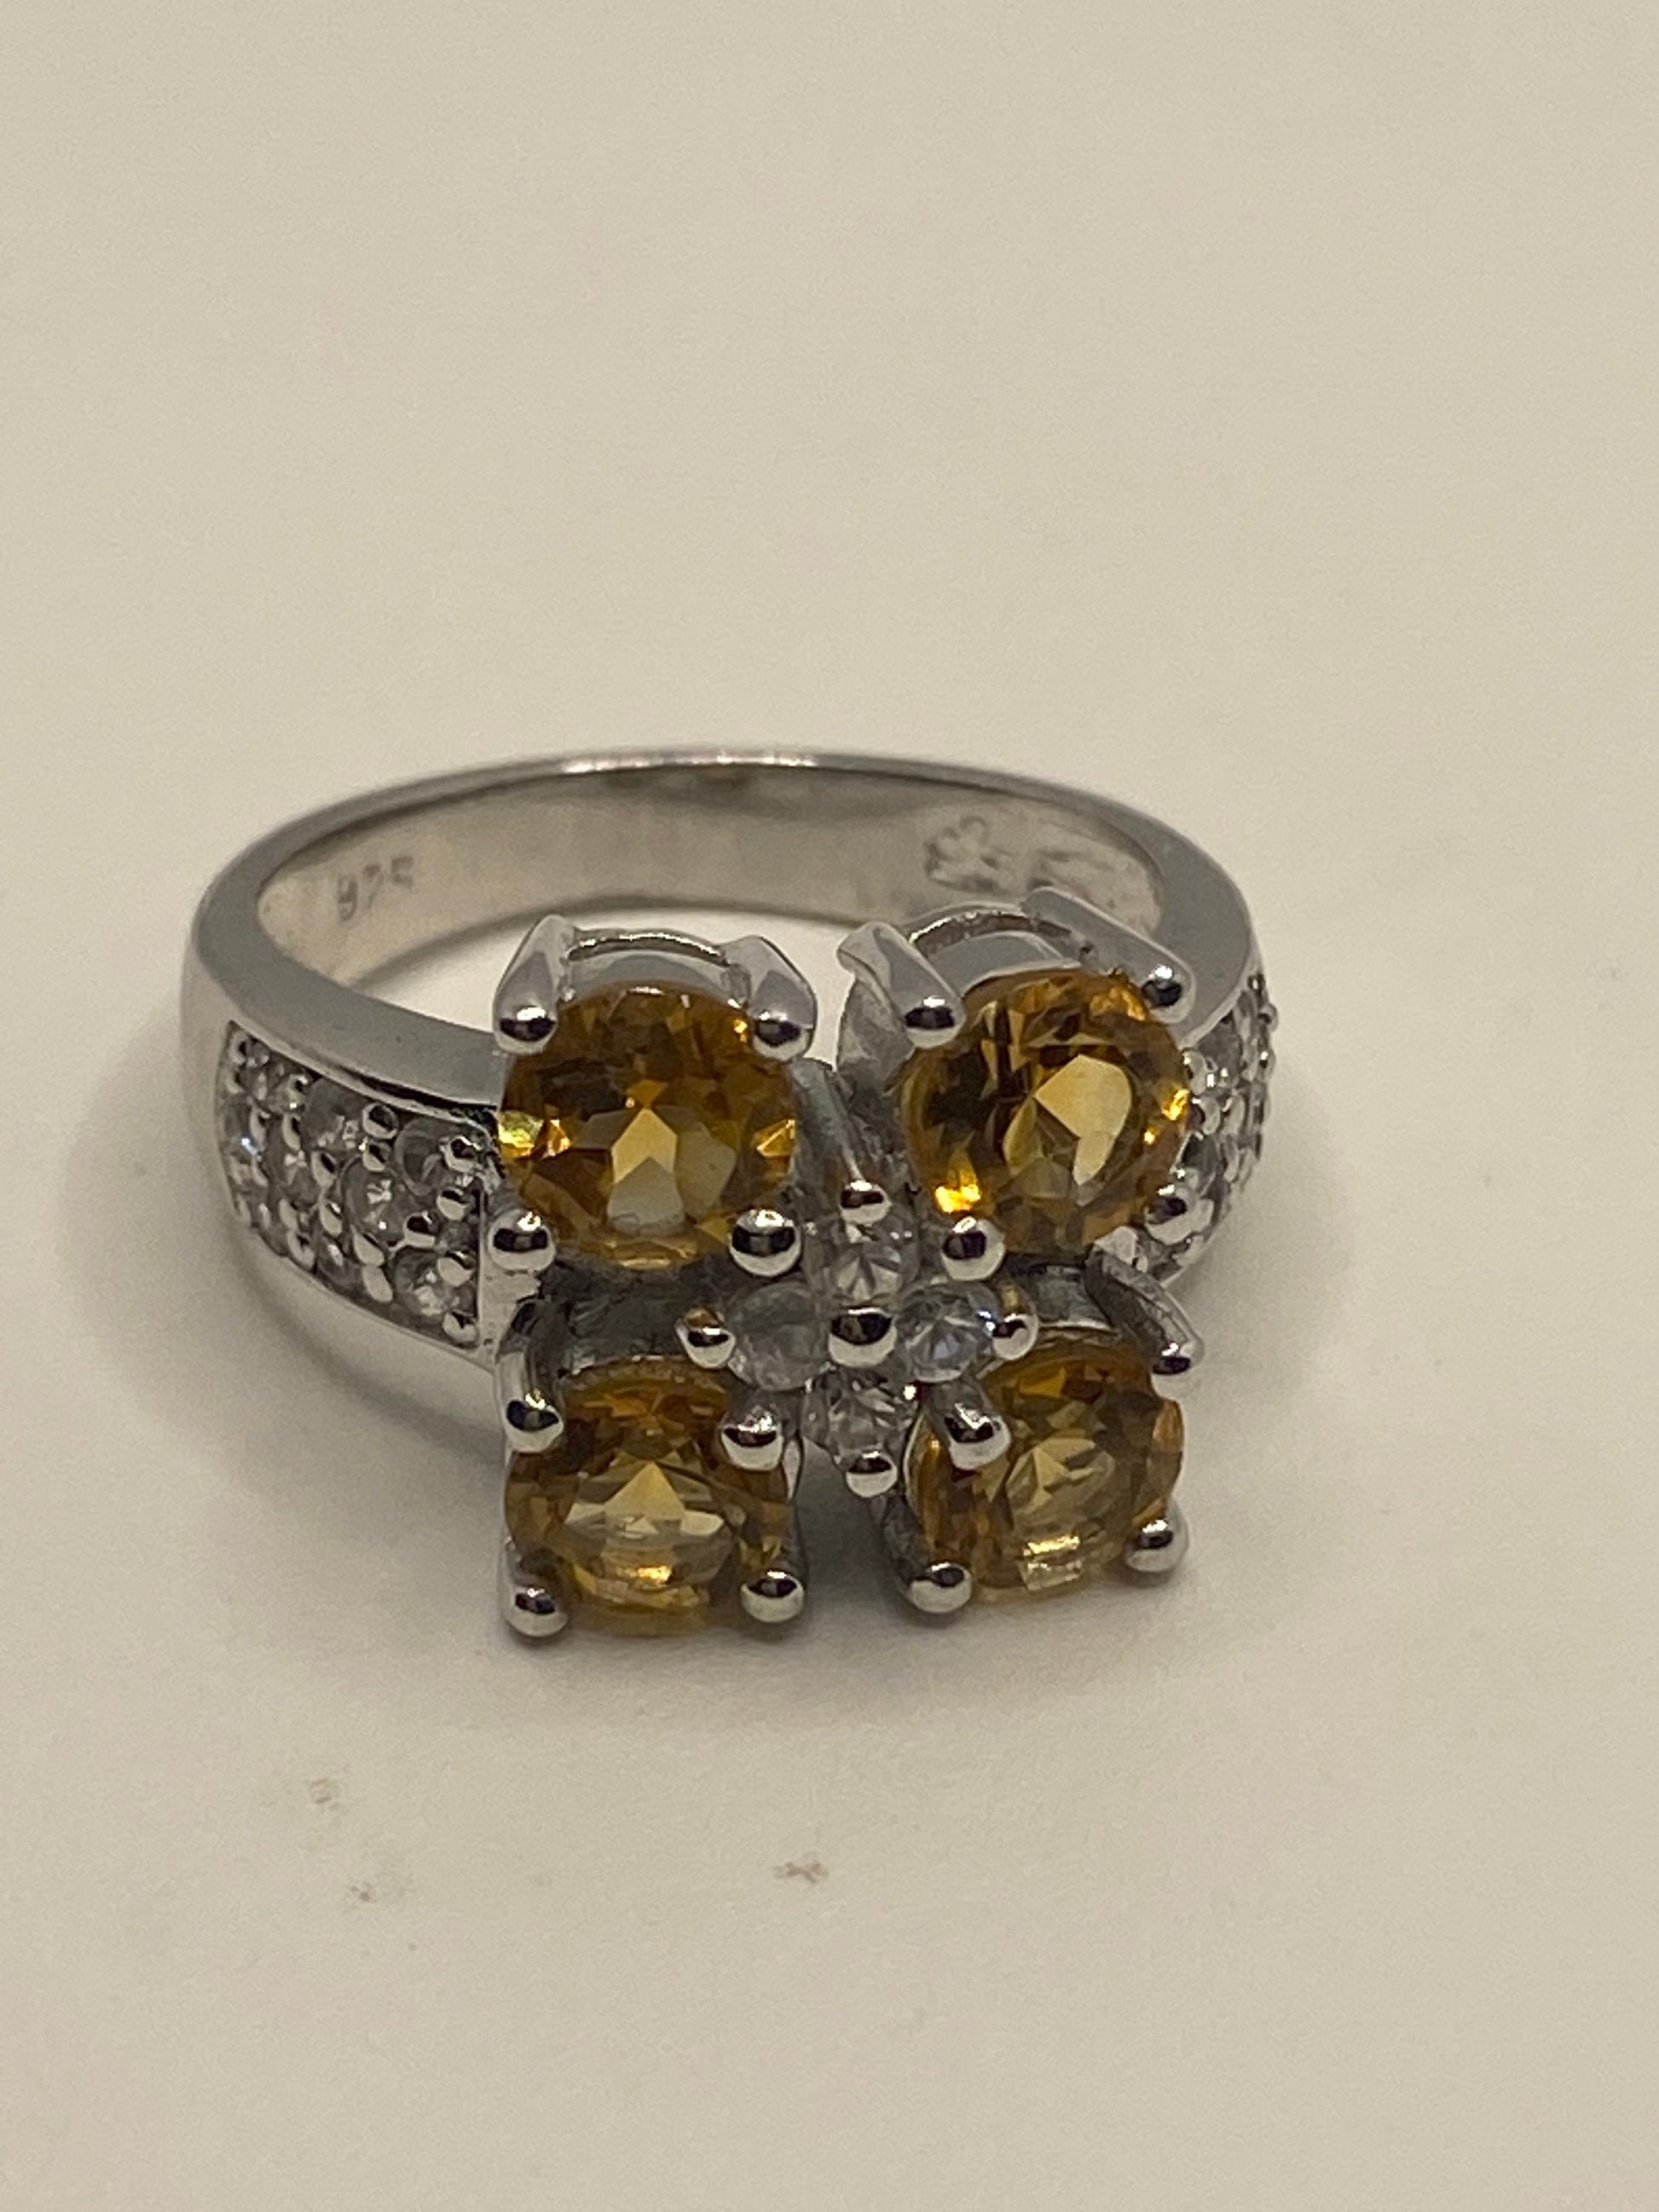 Vintage Golden Citrine and White Sapphire 925 Sterling Silver Ring